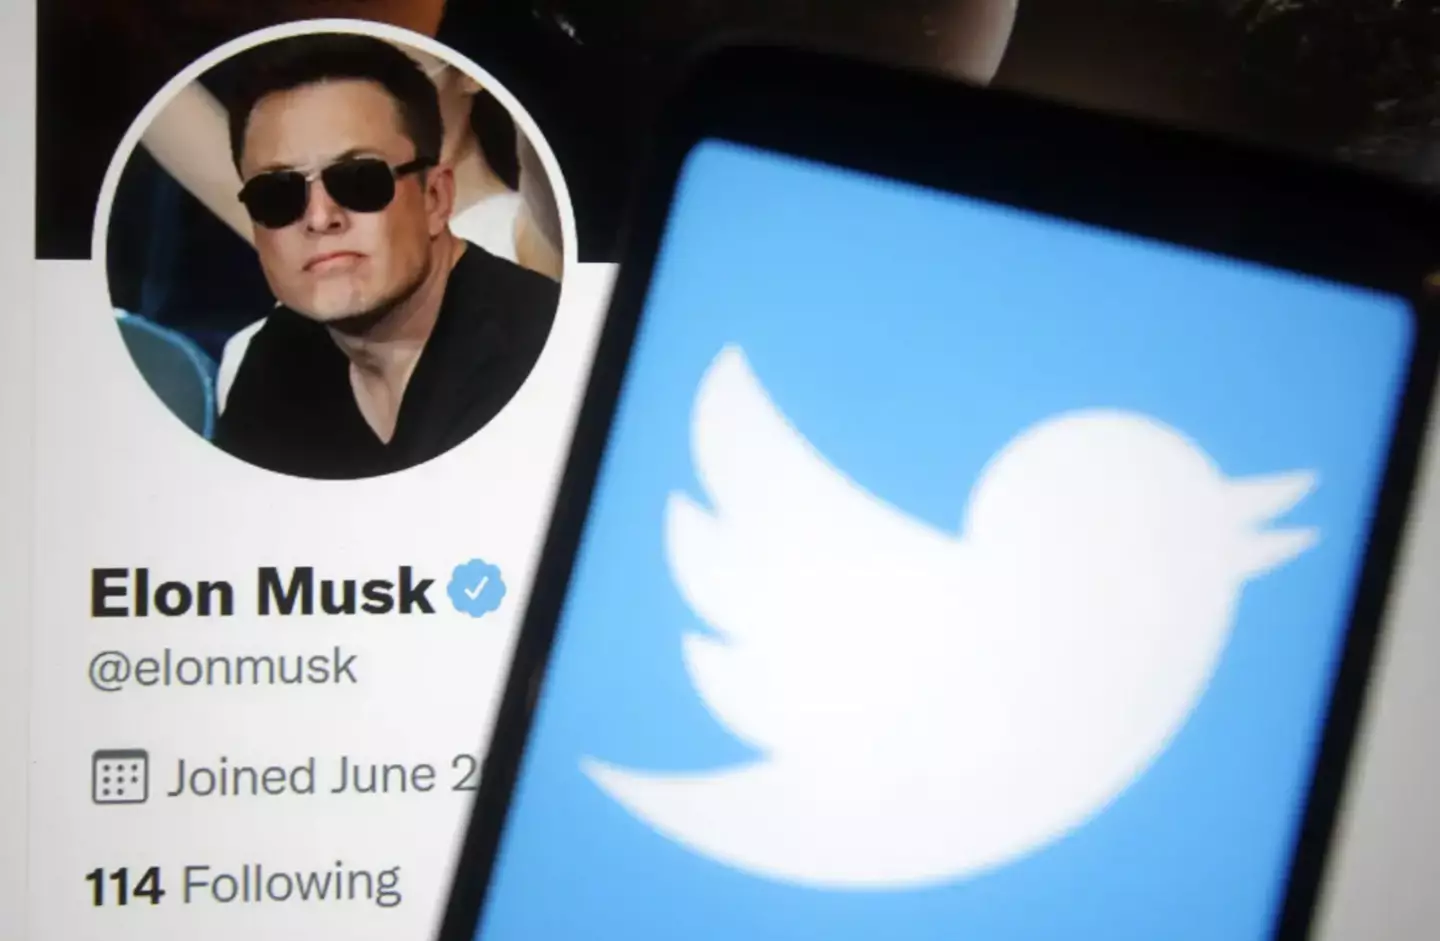 Social media users don’t seem particularly thrilled about Elon Musk’s Twitter takeover.